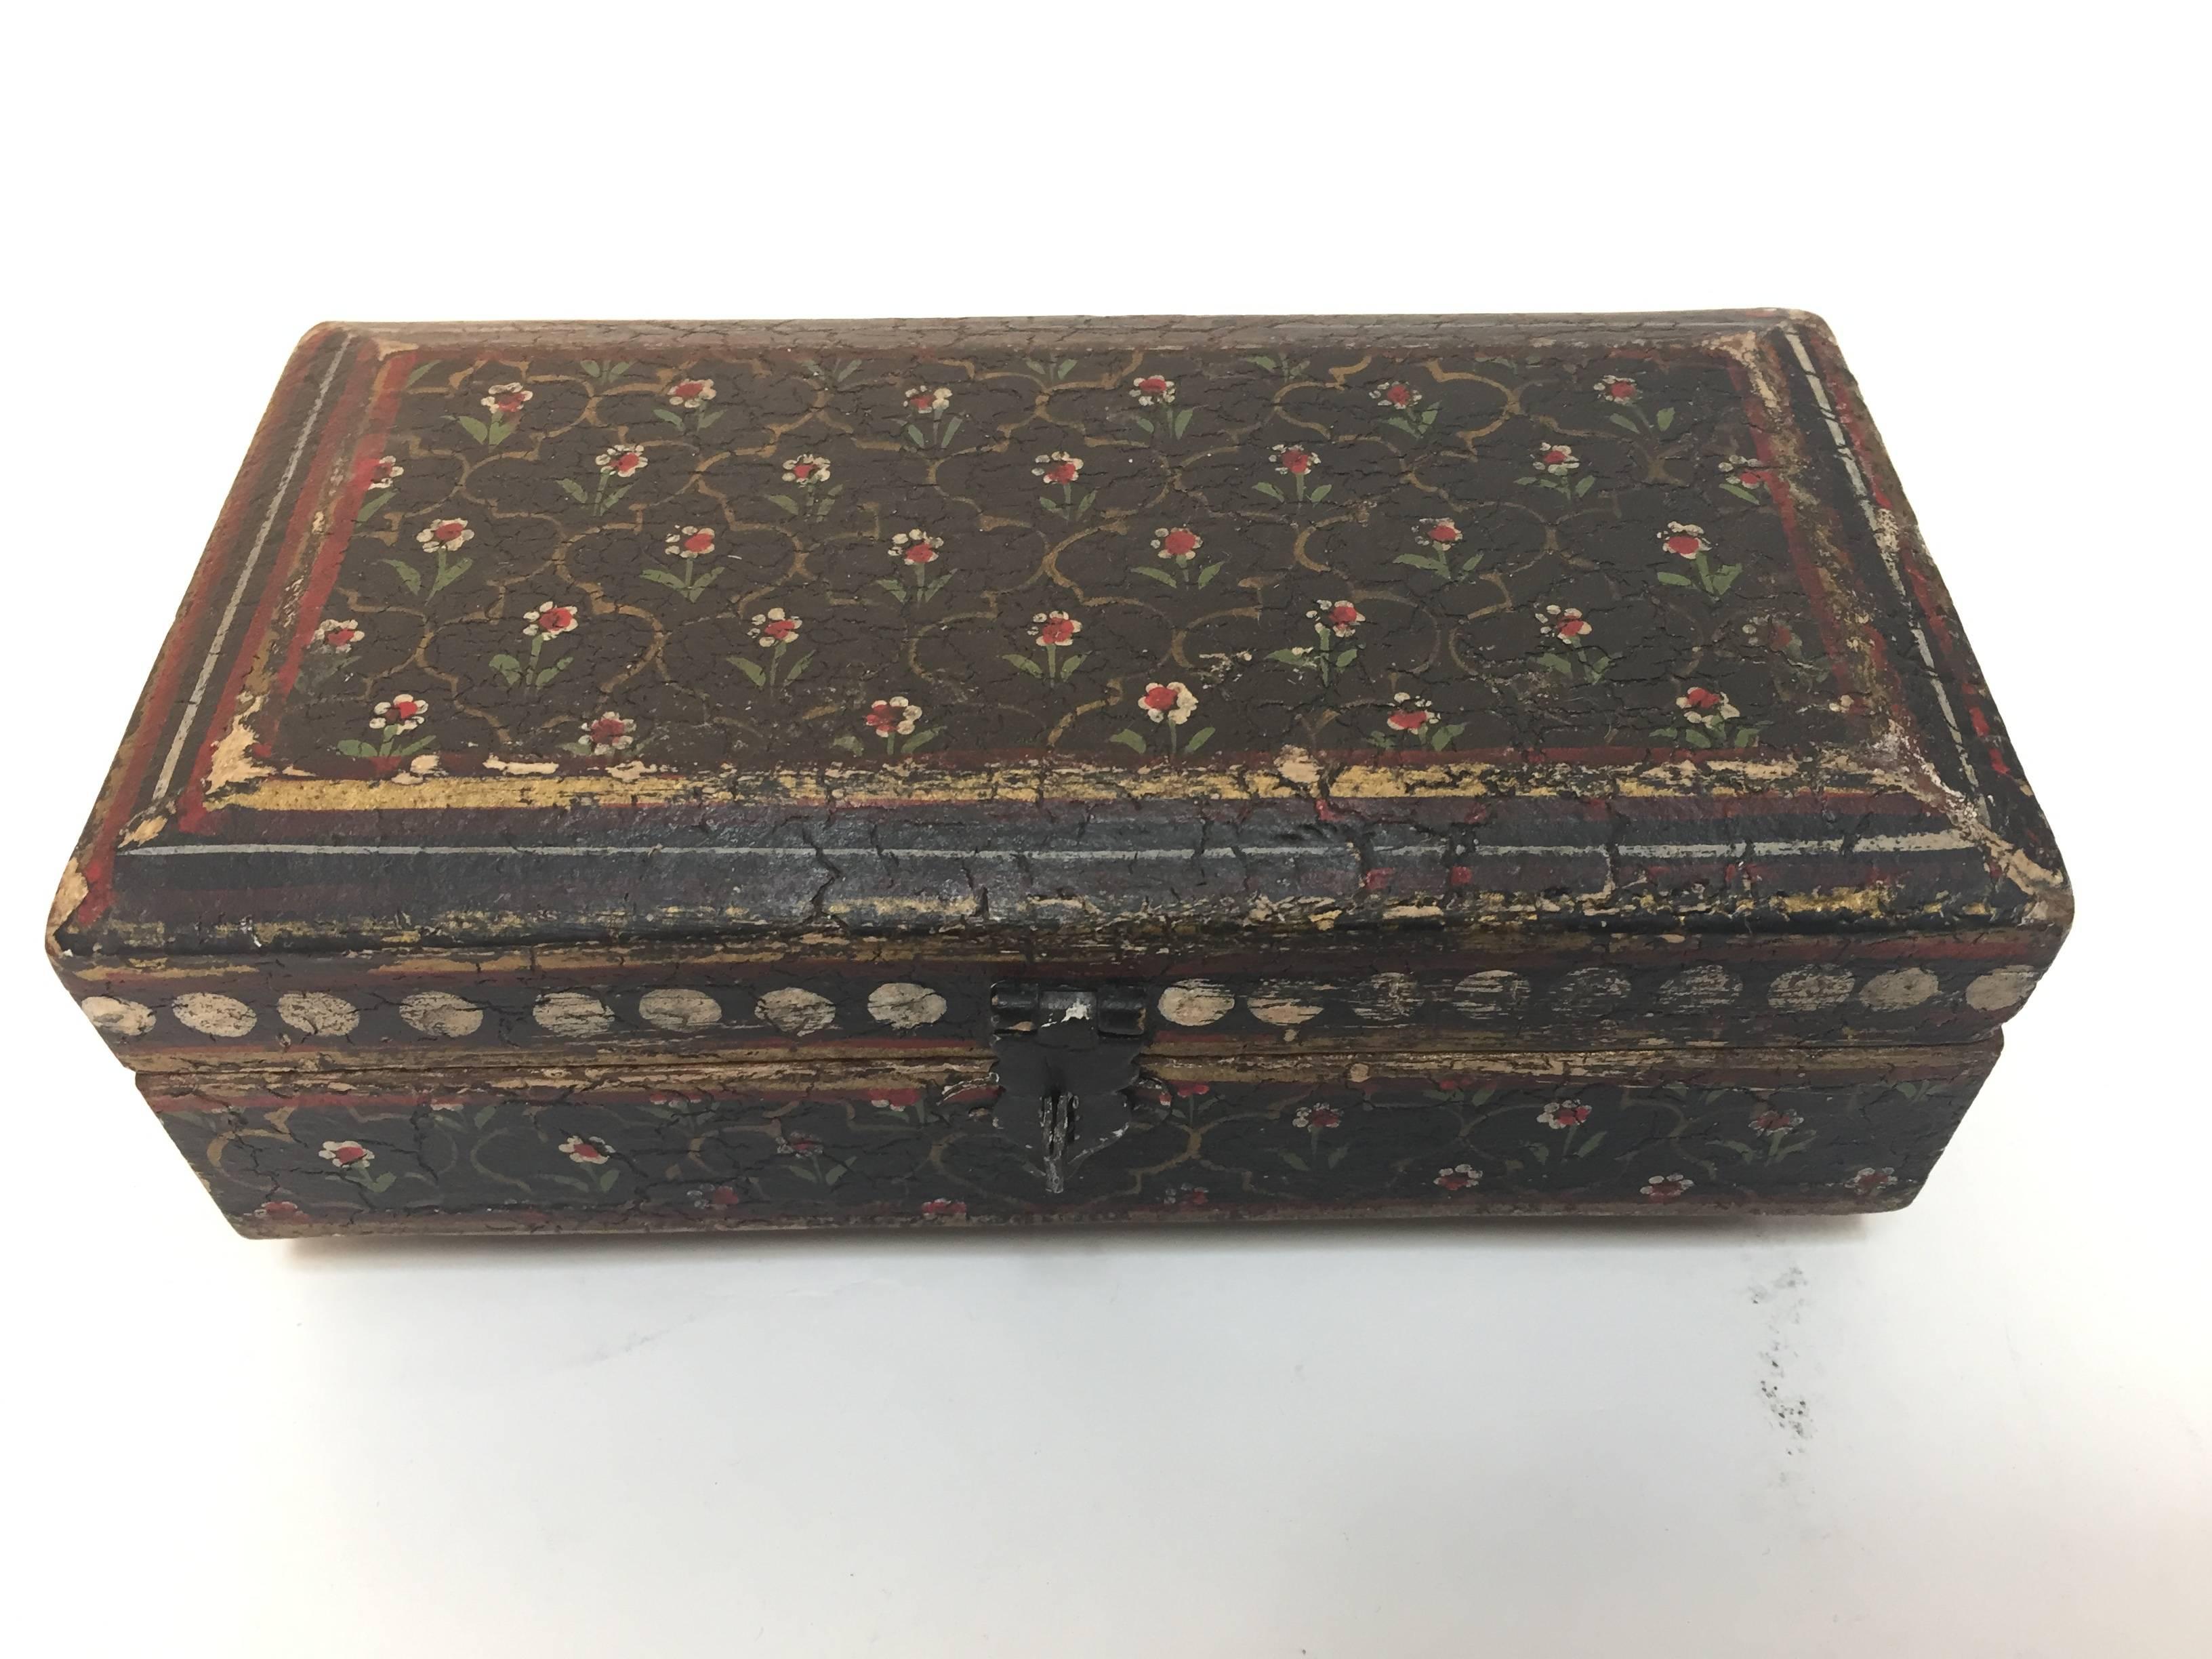 Hand-painted Rajhastani decorative footed tea box.
Hand-painted rectangular shape wood with hinged lid and decorated with floral designs on black outside and gold on ivory inside.